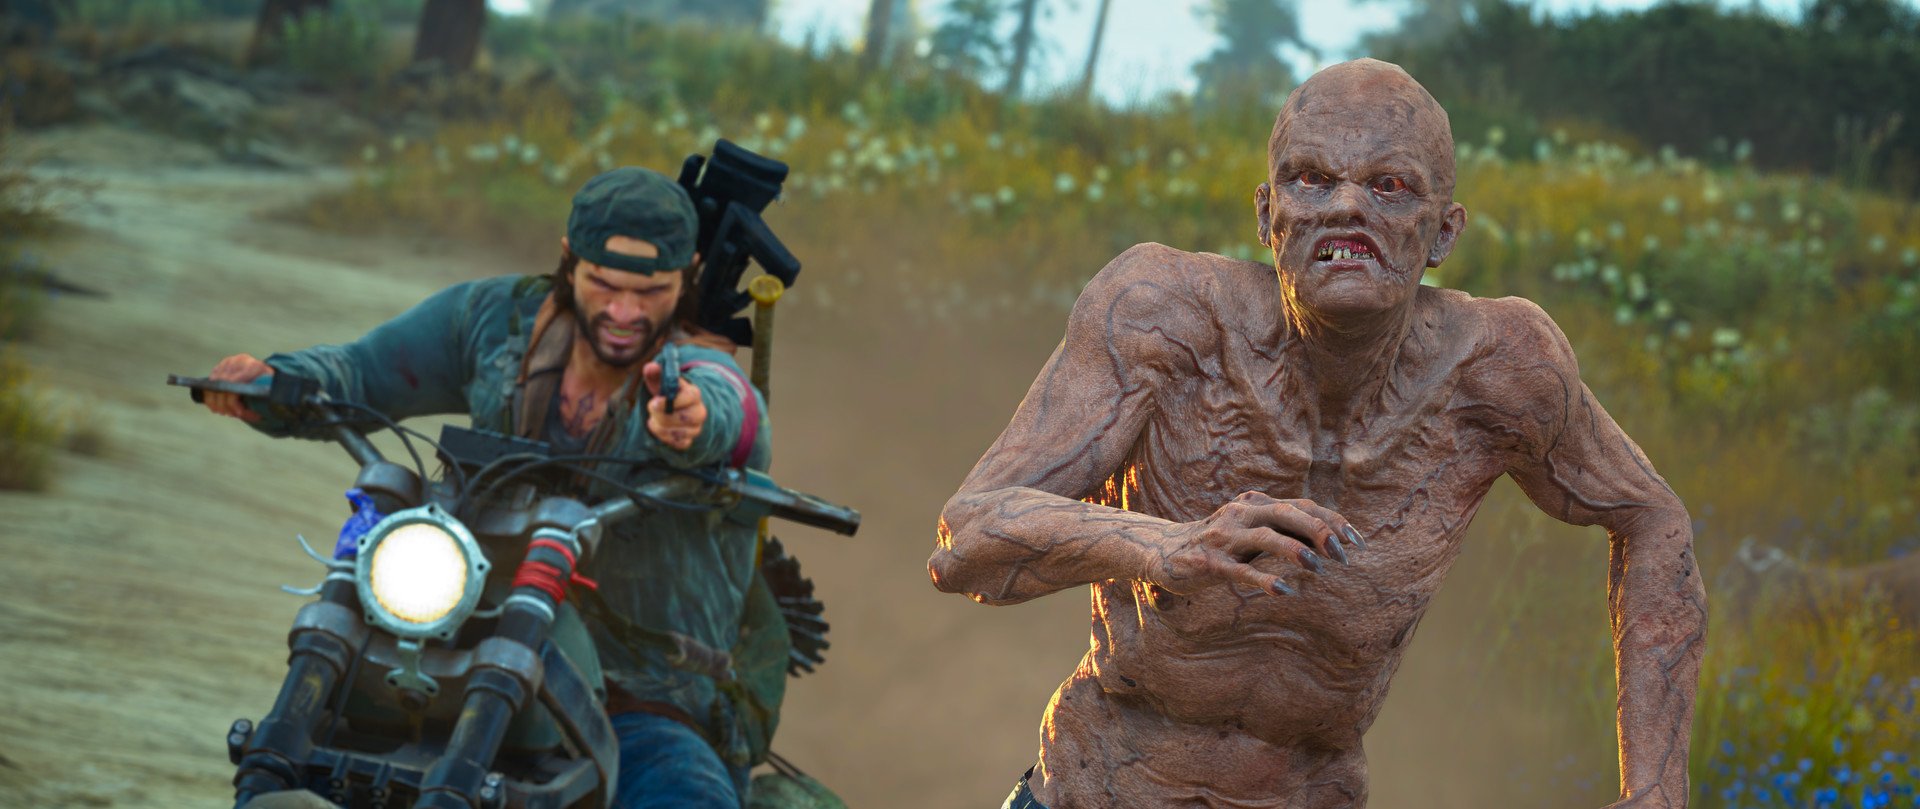 Sony is reportedly making a 'Days Gone' movie